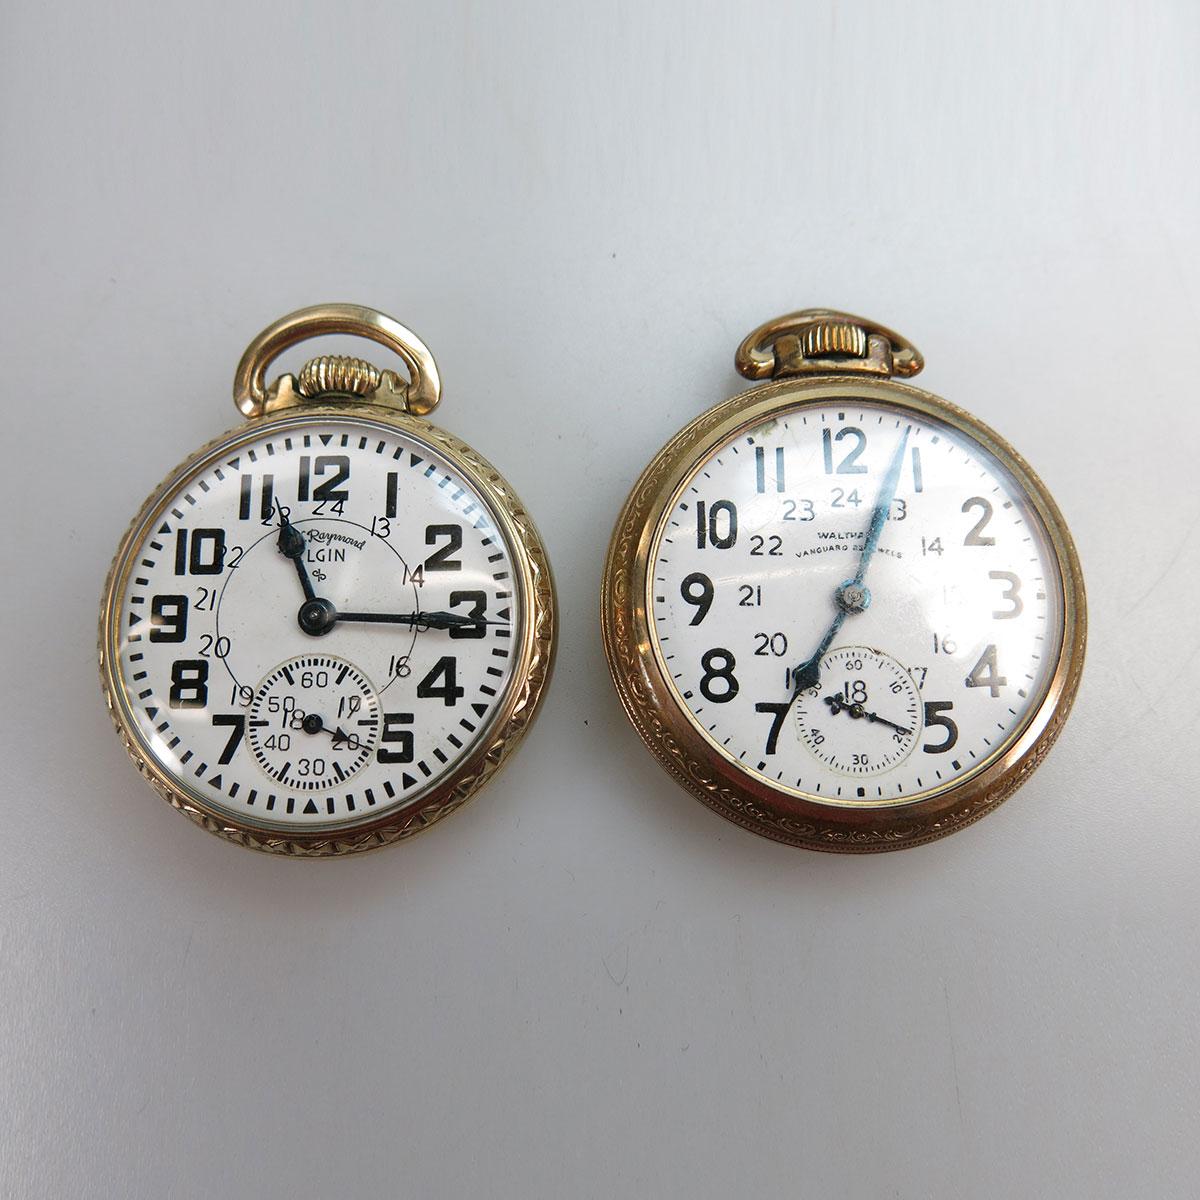 Two Railroad Grade Pocket Watches